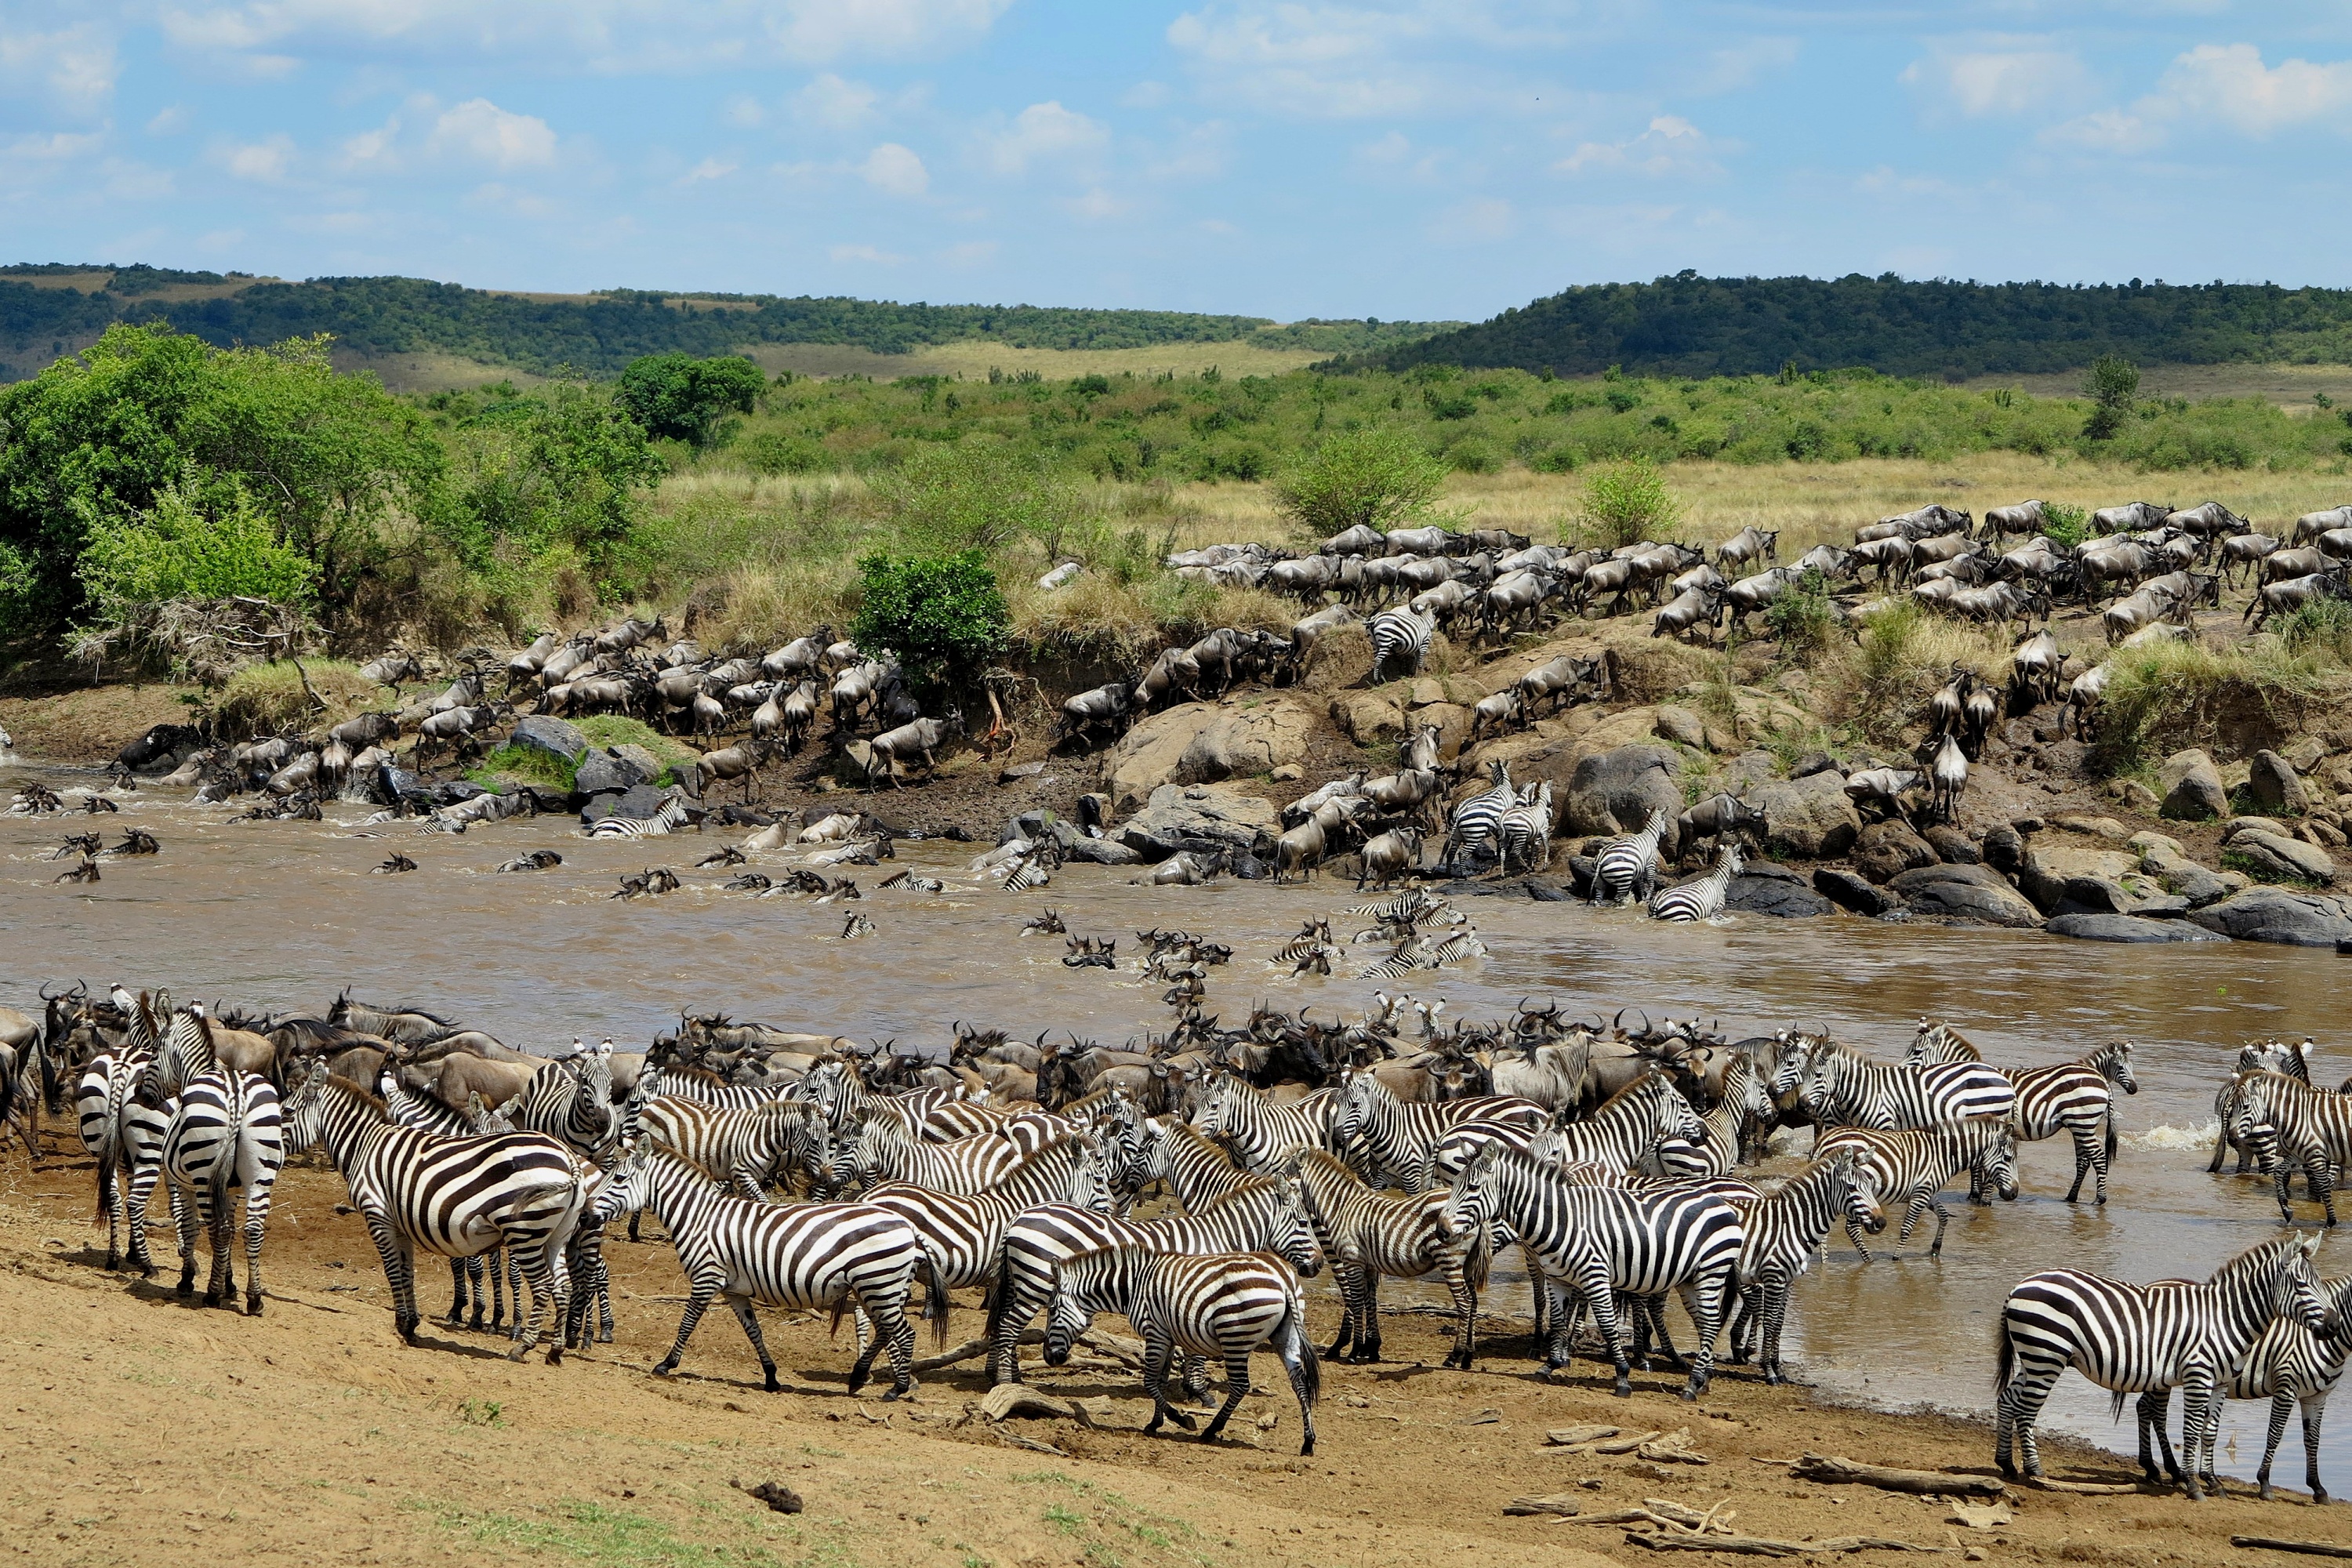 Best Family Friendly Things to Do in Kenya - The Great Migration in Masai Mara